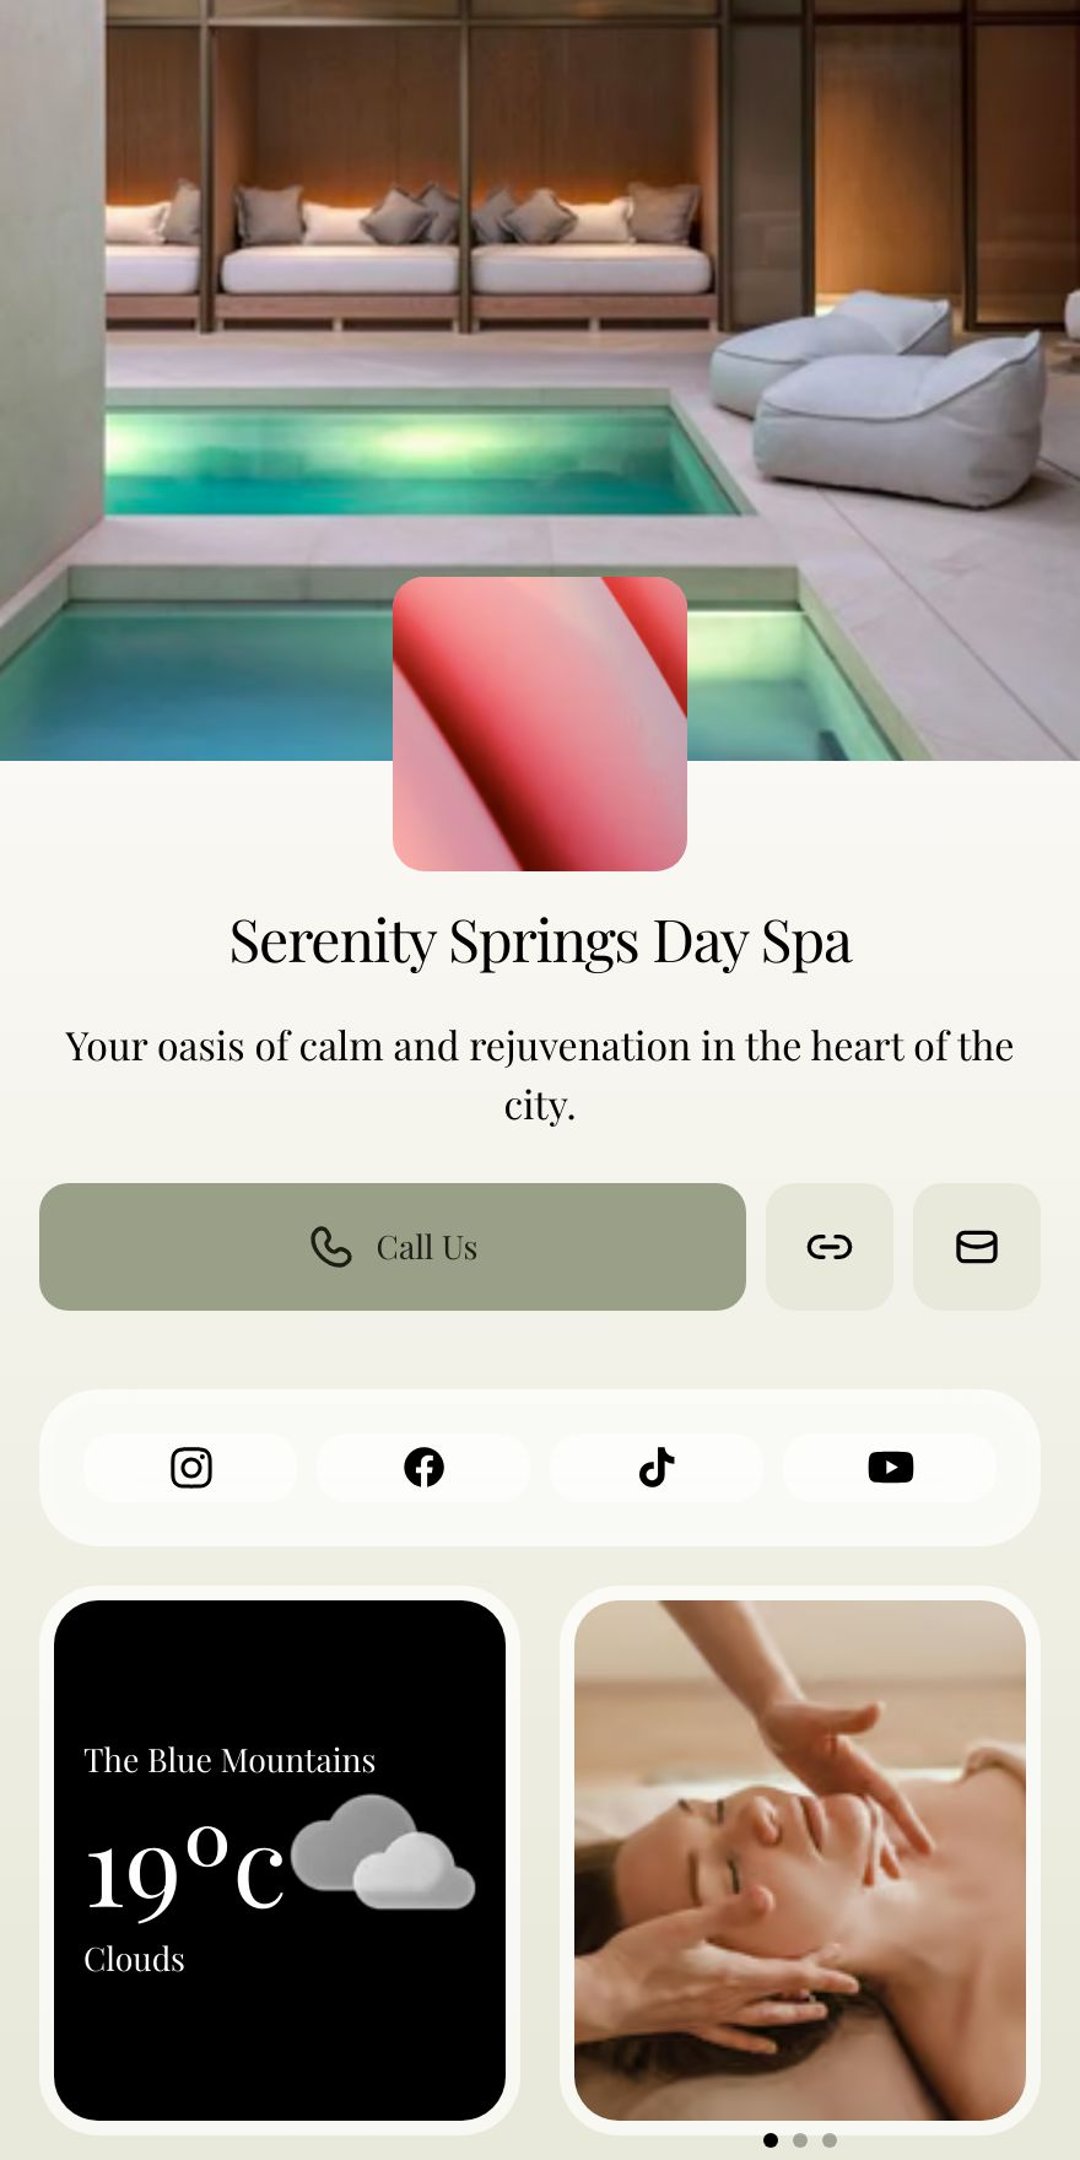 Day spa